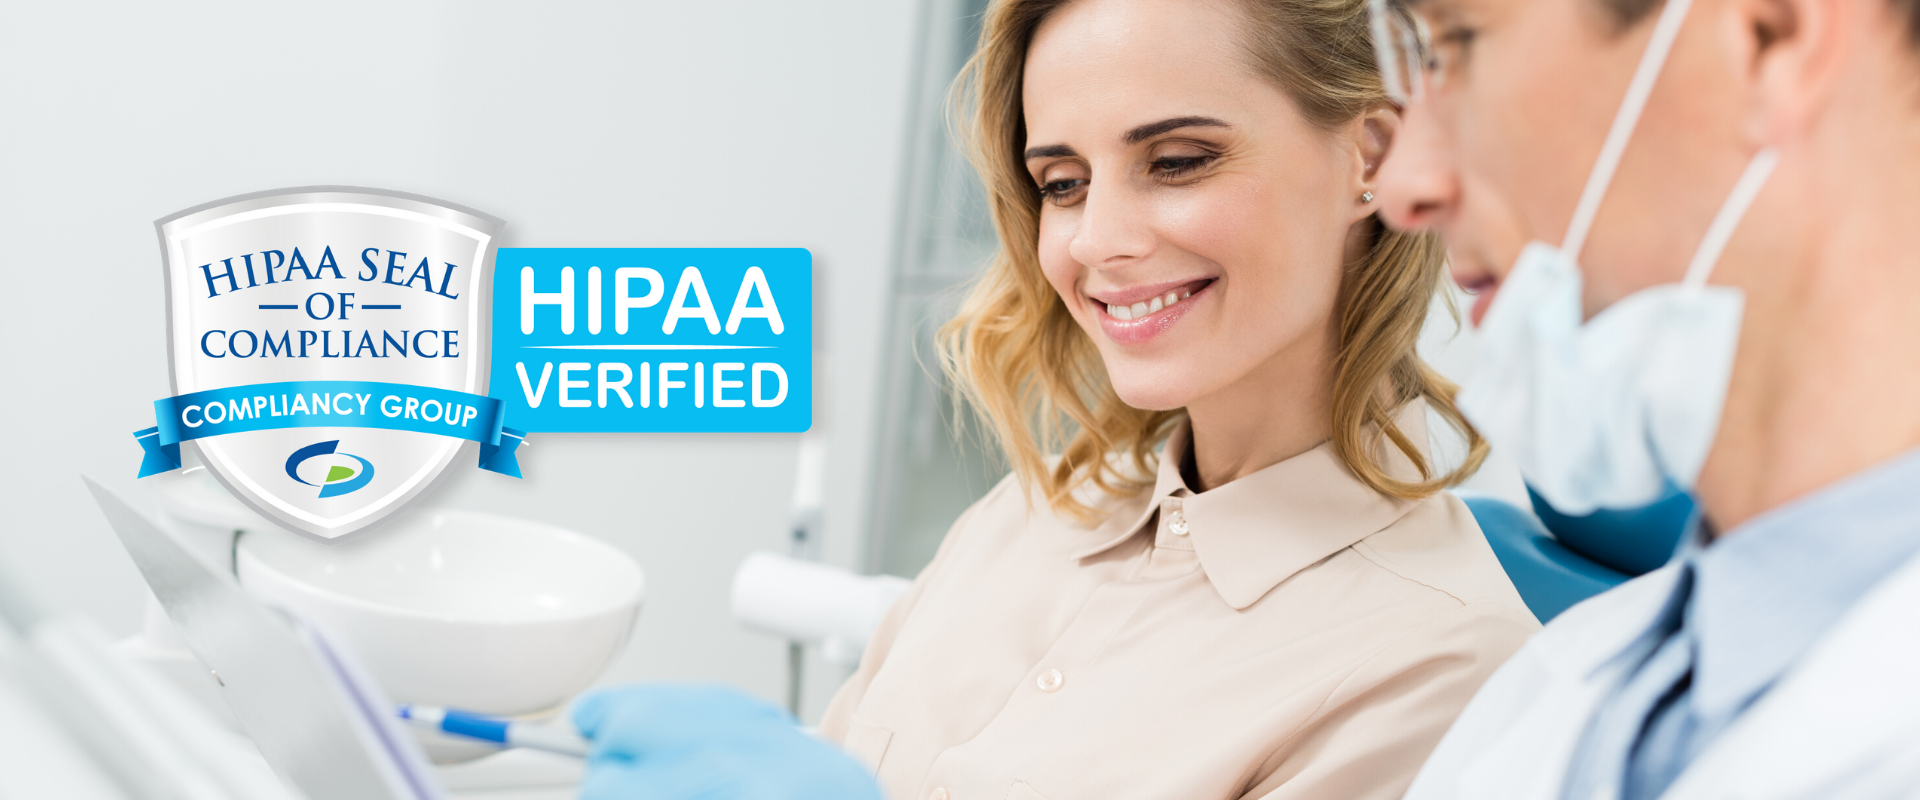 eAssist Dental Solutions Awarded HIPAA Certification by Compliancy